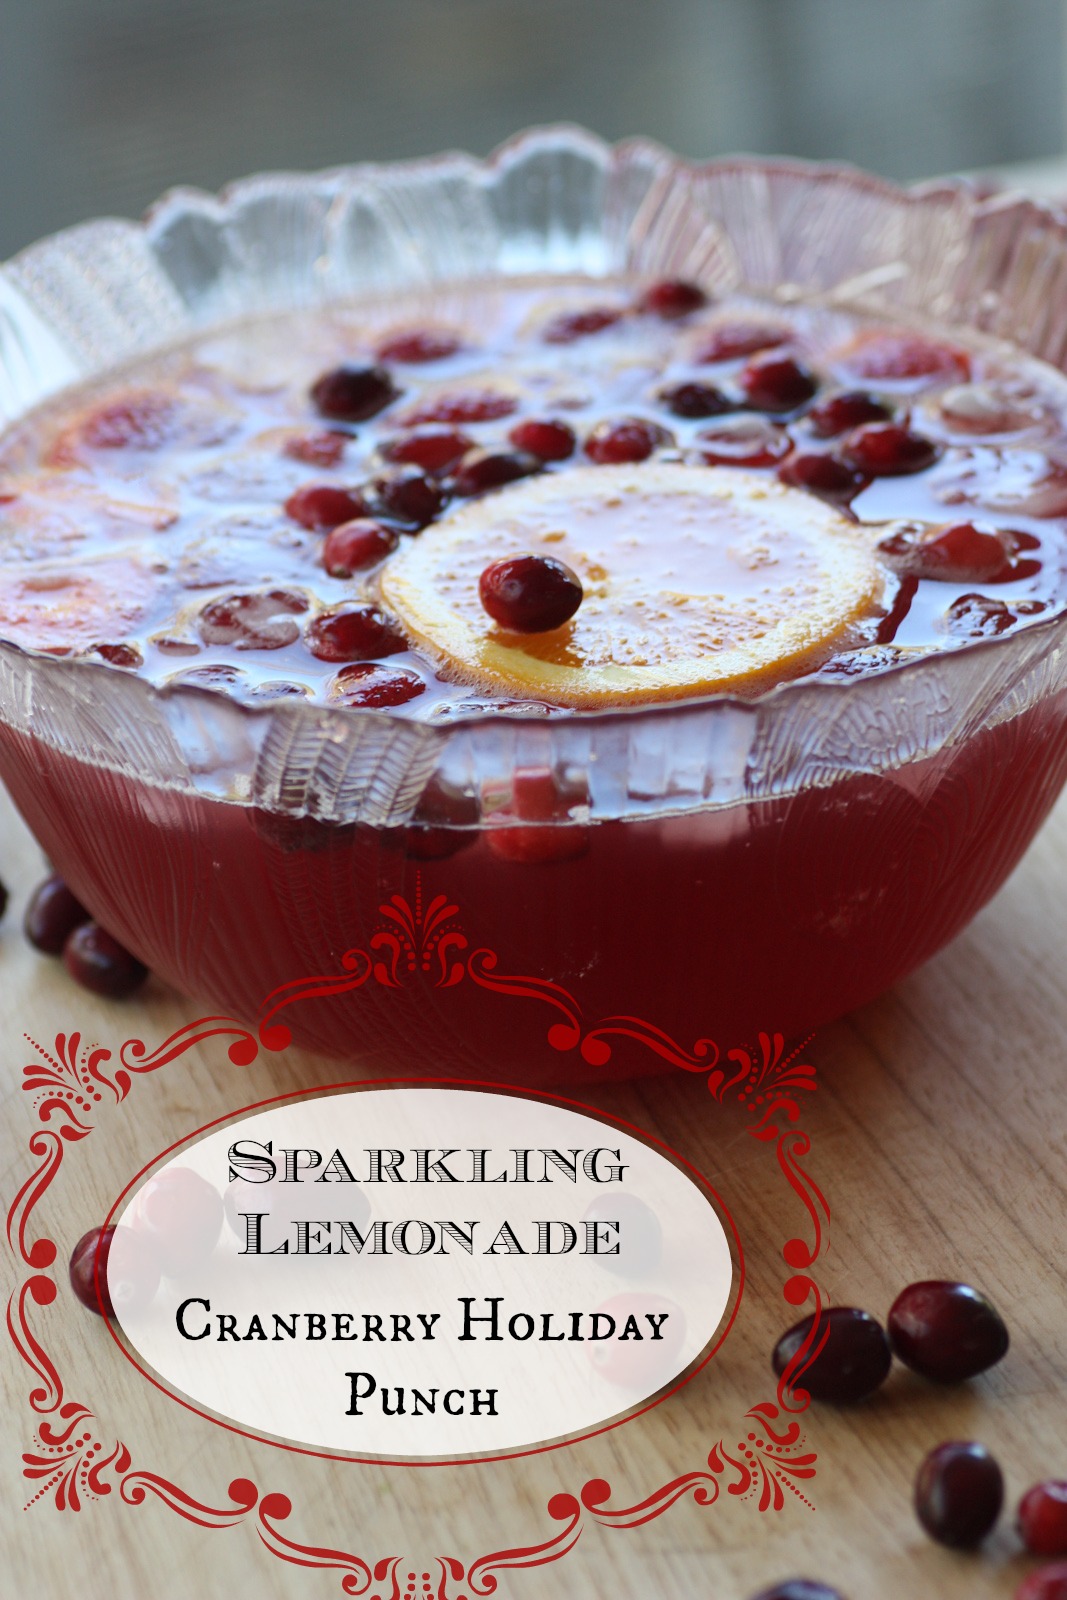 Sparkling Lemonade Cranberry Holiday Punch Recipe | Catch My Party